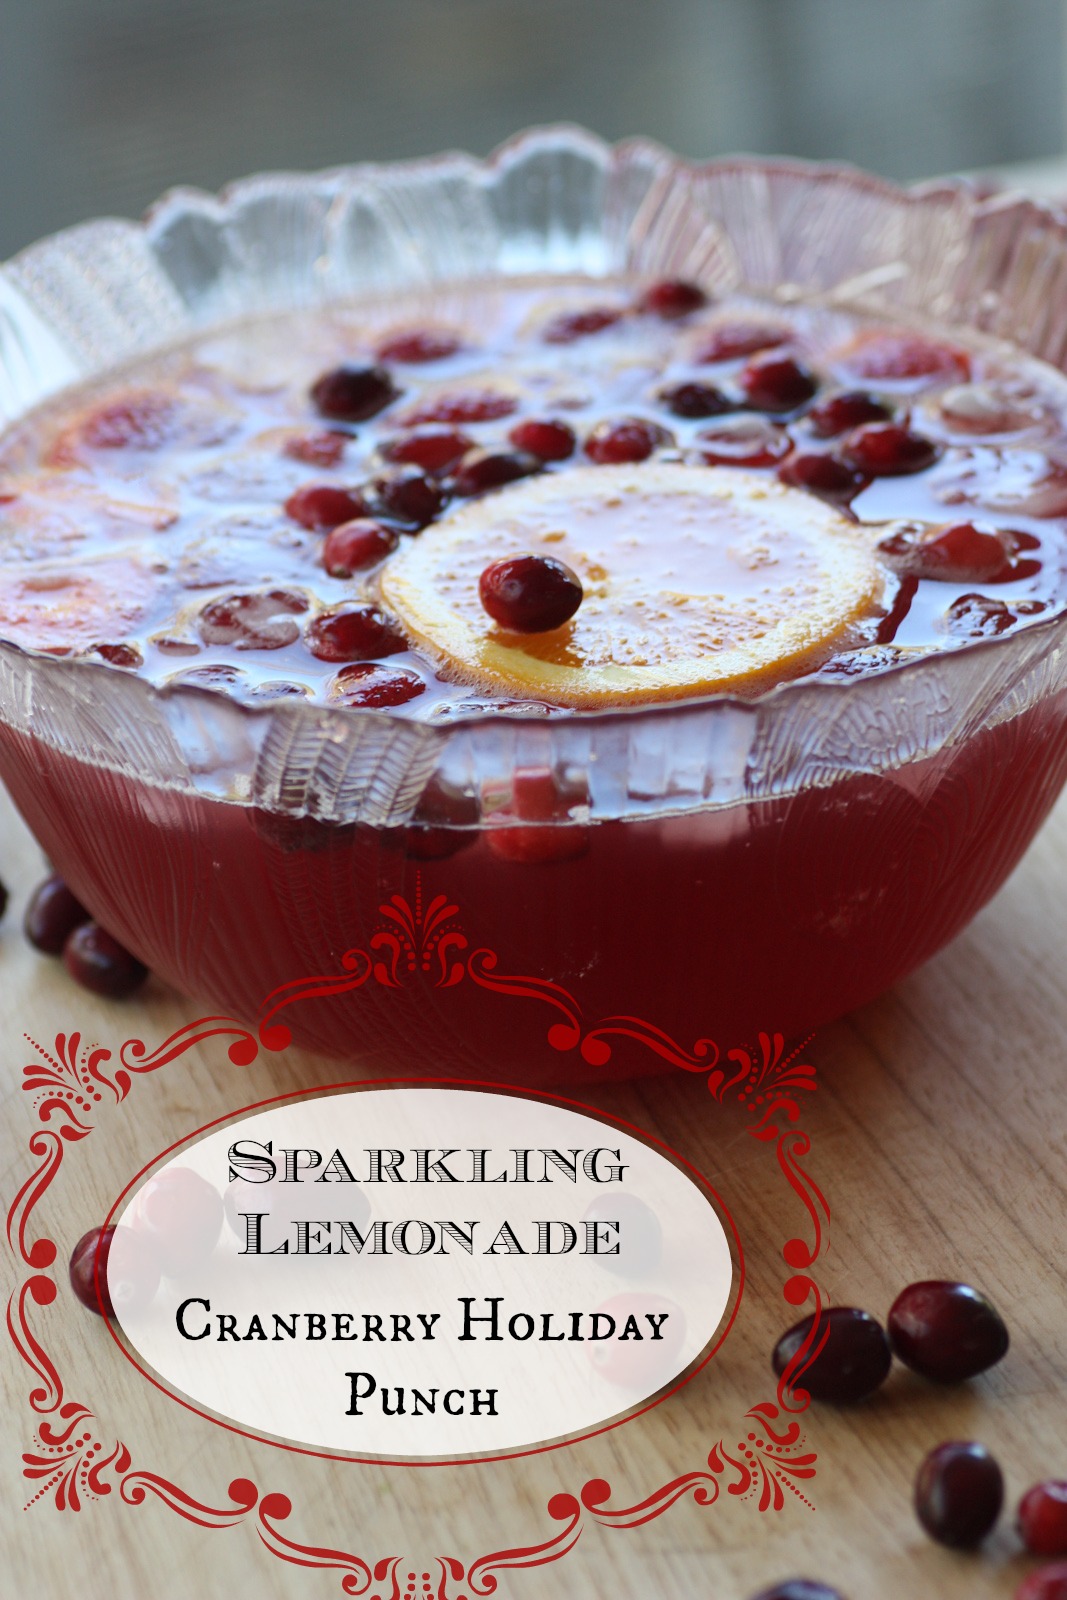 Sparkling Lemonade Cranberry Holiday Punch Recipe | Catch My Party